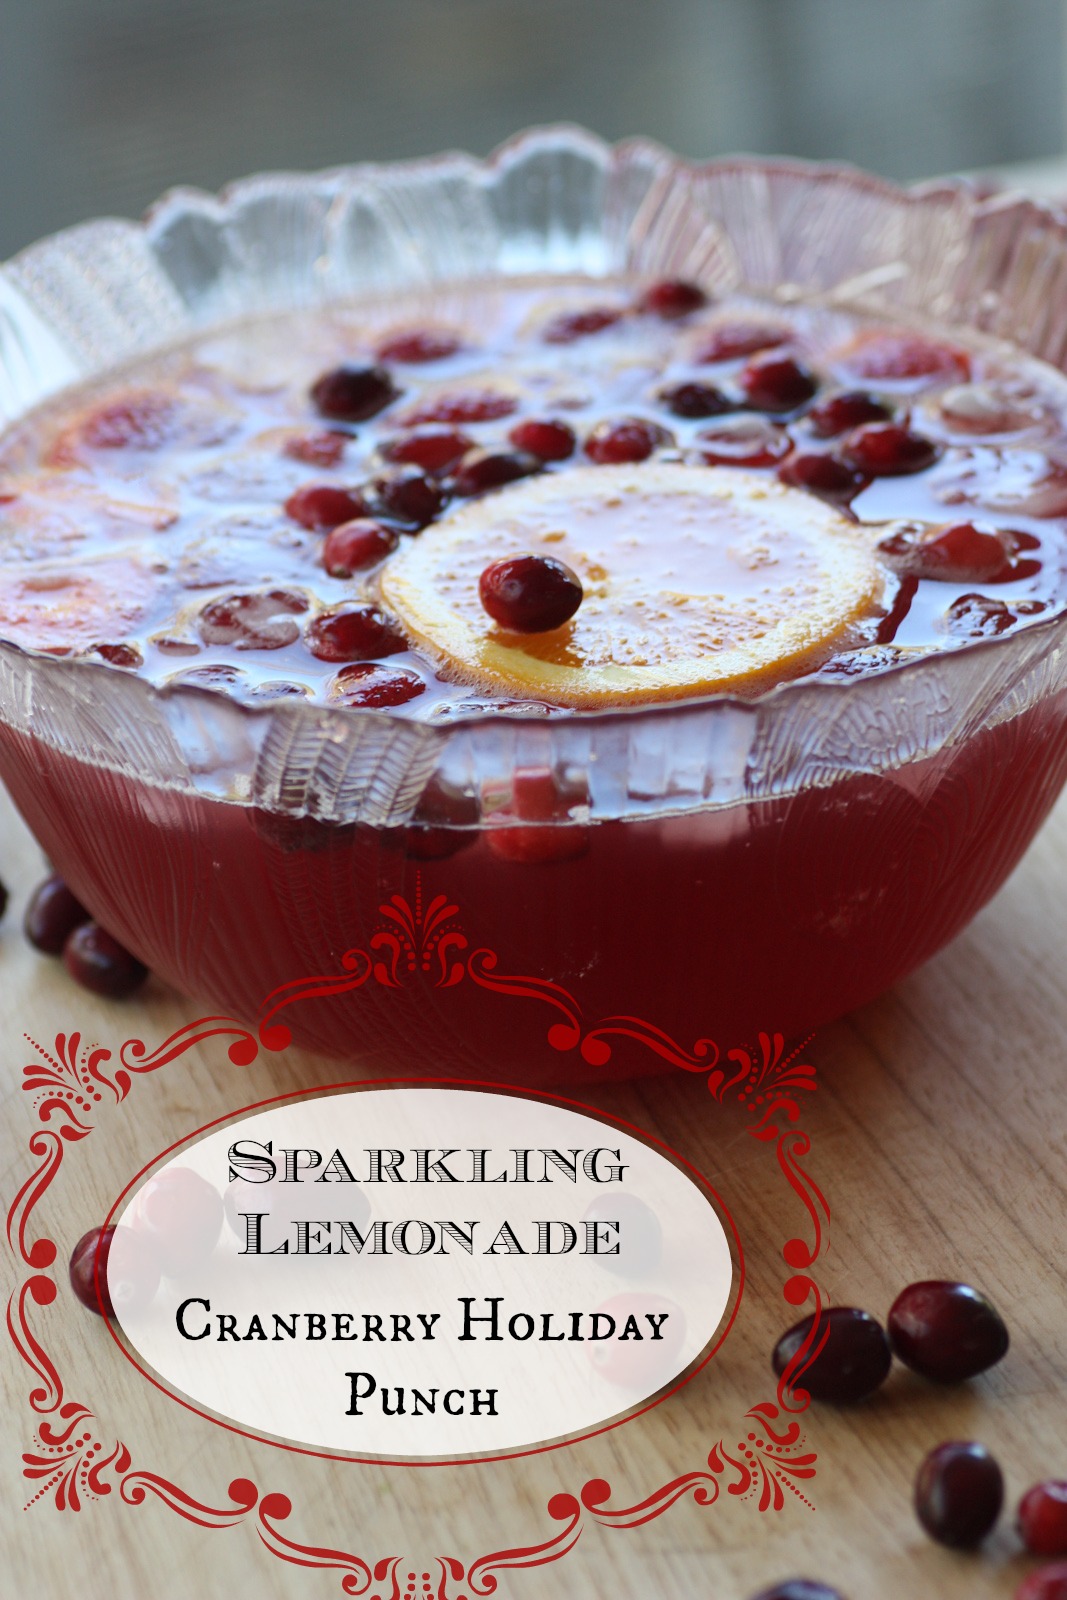 Sparkling Lemonade Cranberry Holiday Punch Recipe | Catch My Party